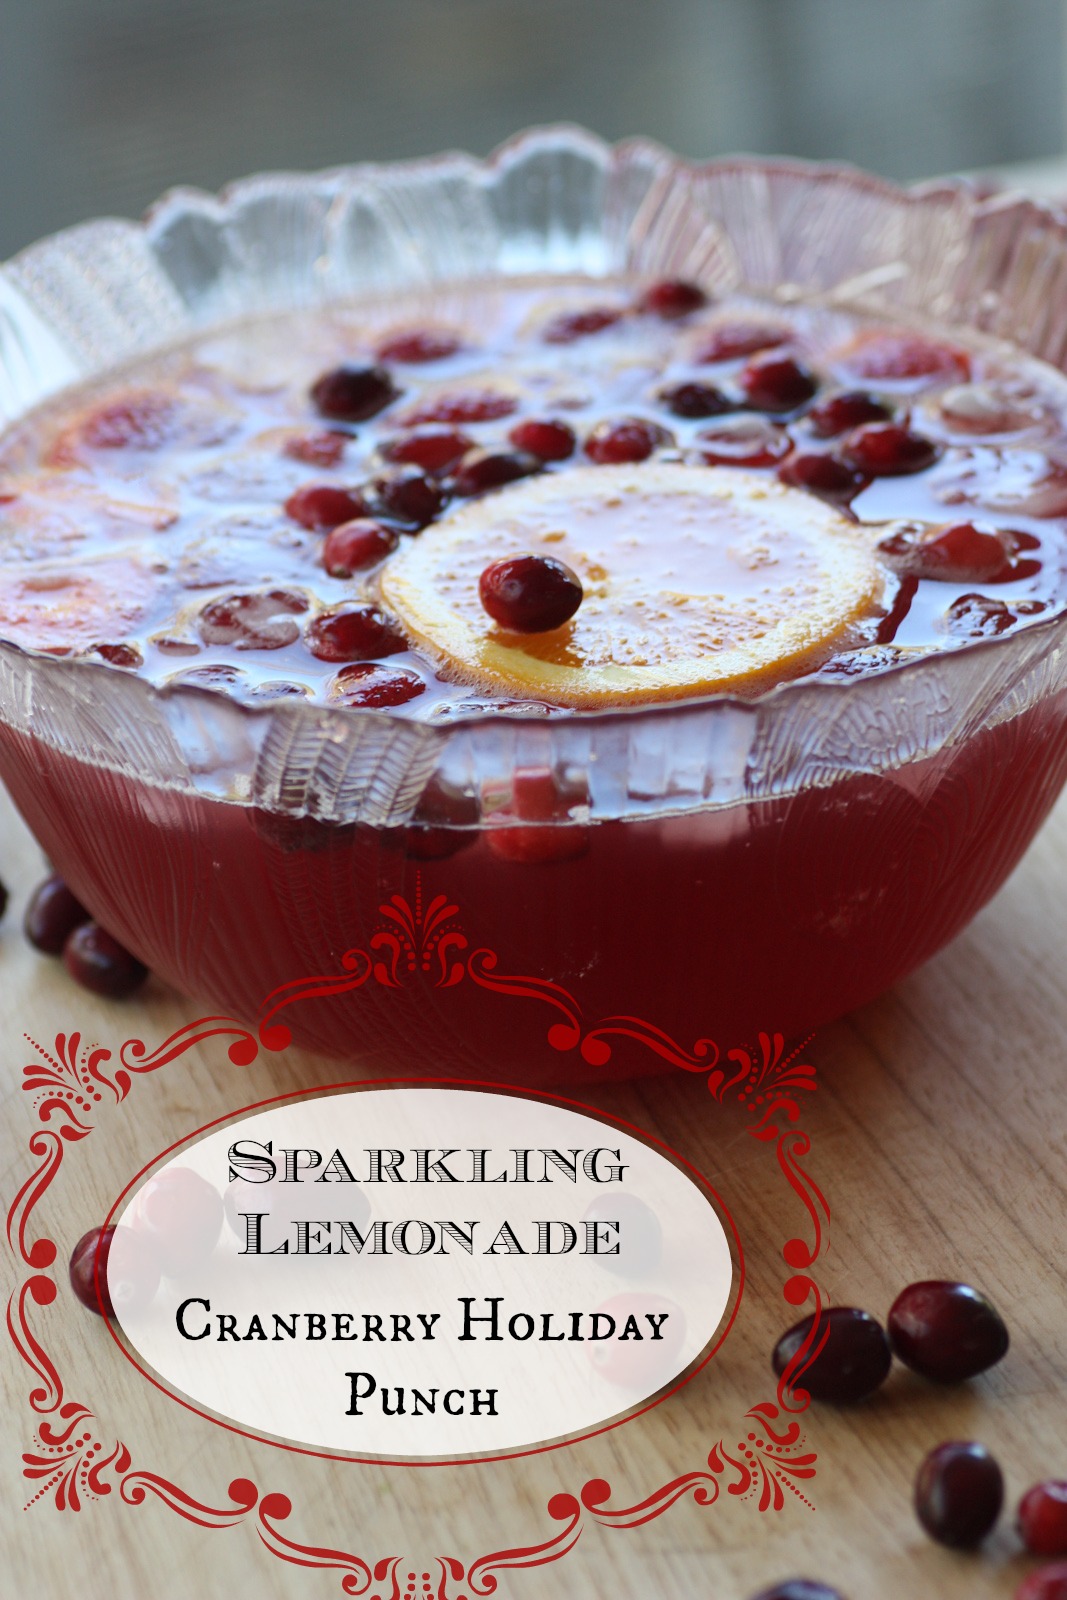 Sparkling Lemonade Cranberry Holiday Punch Recipe | Catch My Party